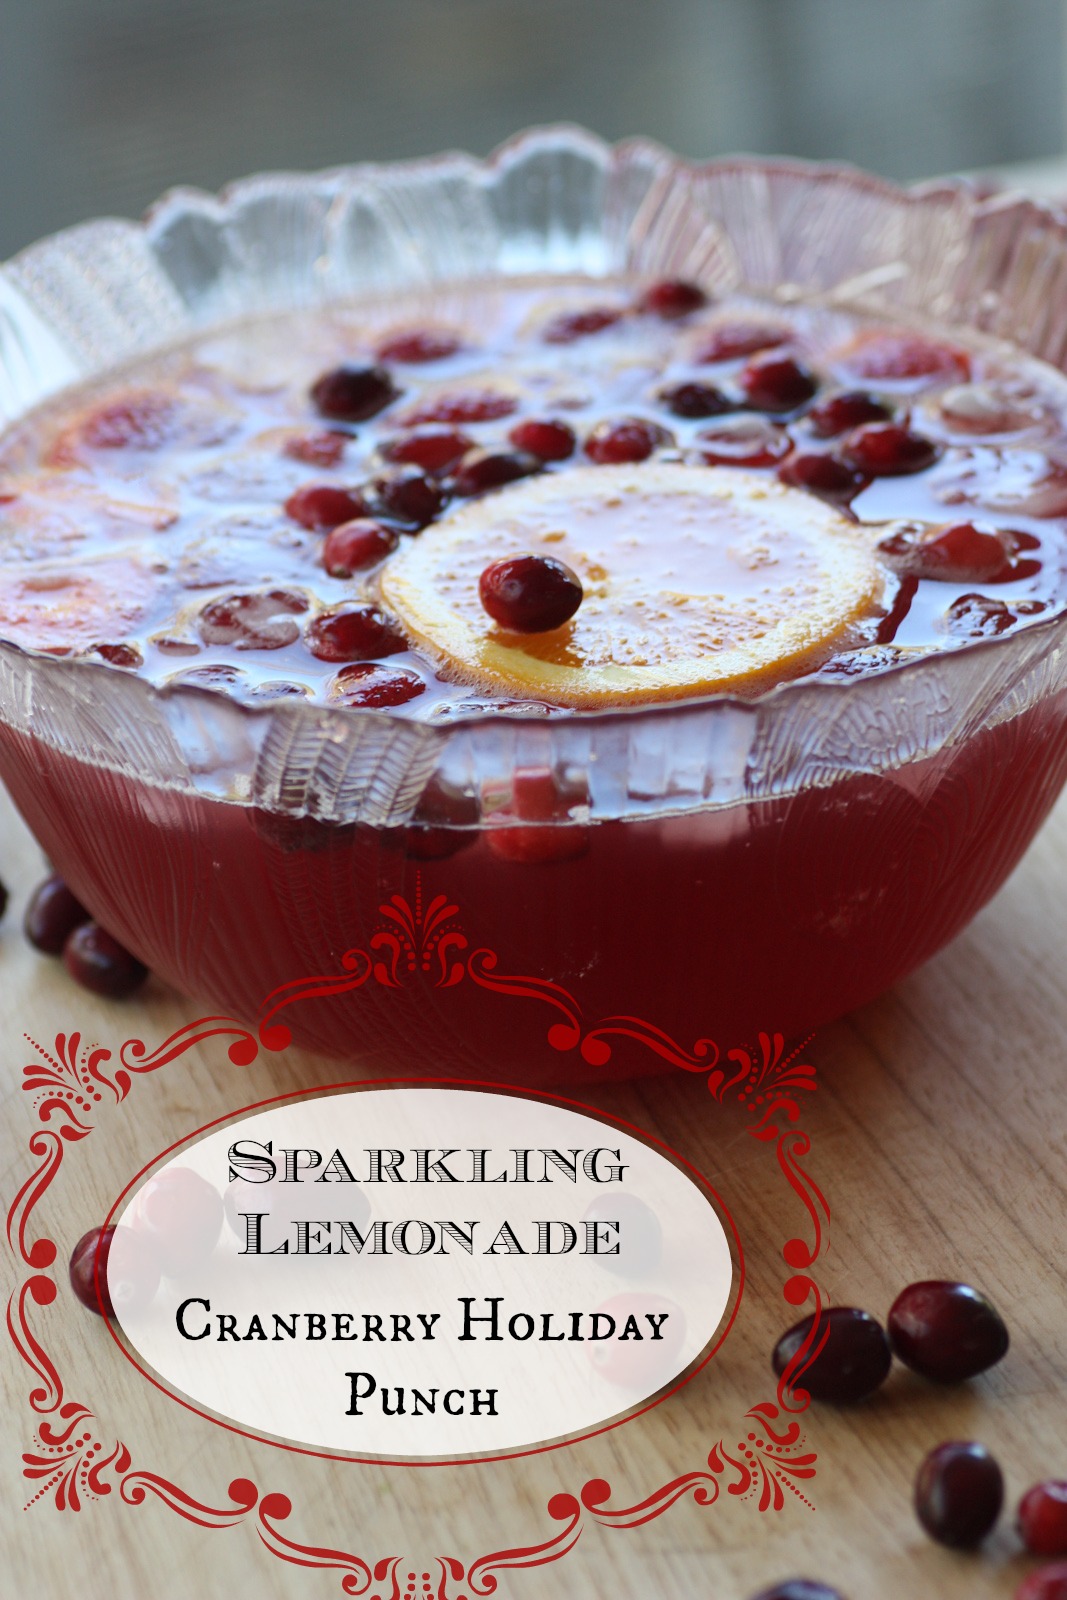 Sparkling Lemonade Cranberry Holiday Punch Recipe | Catch My Party